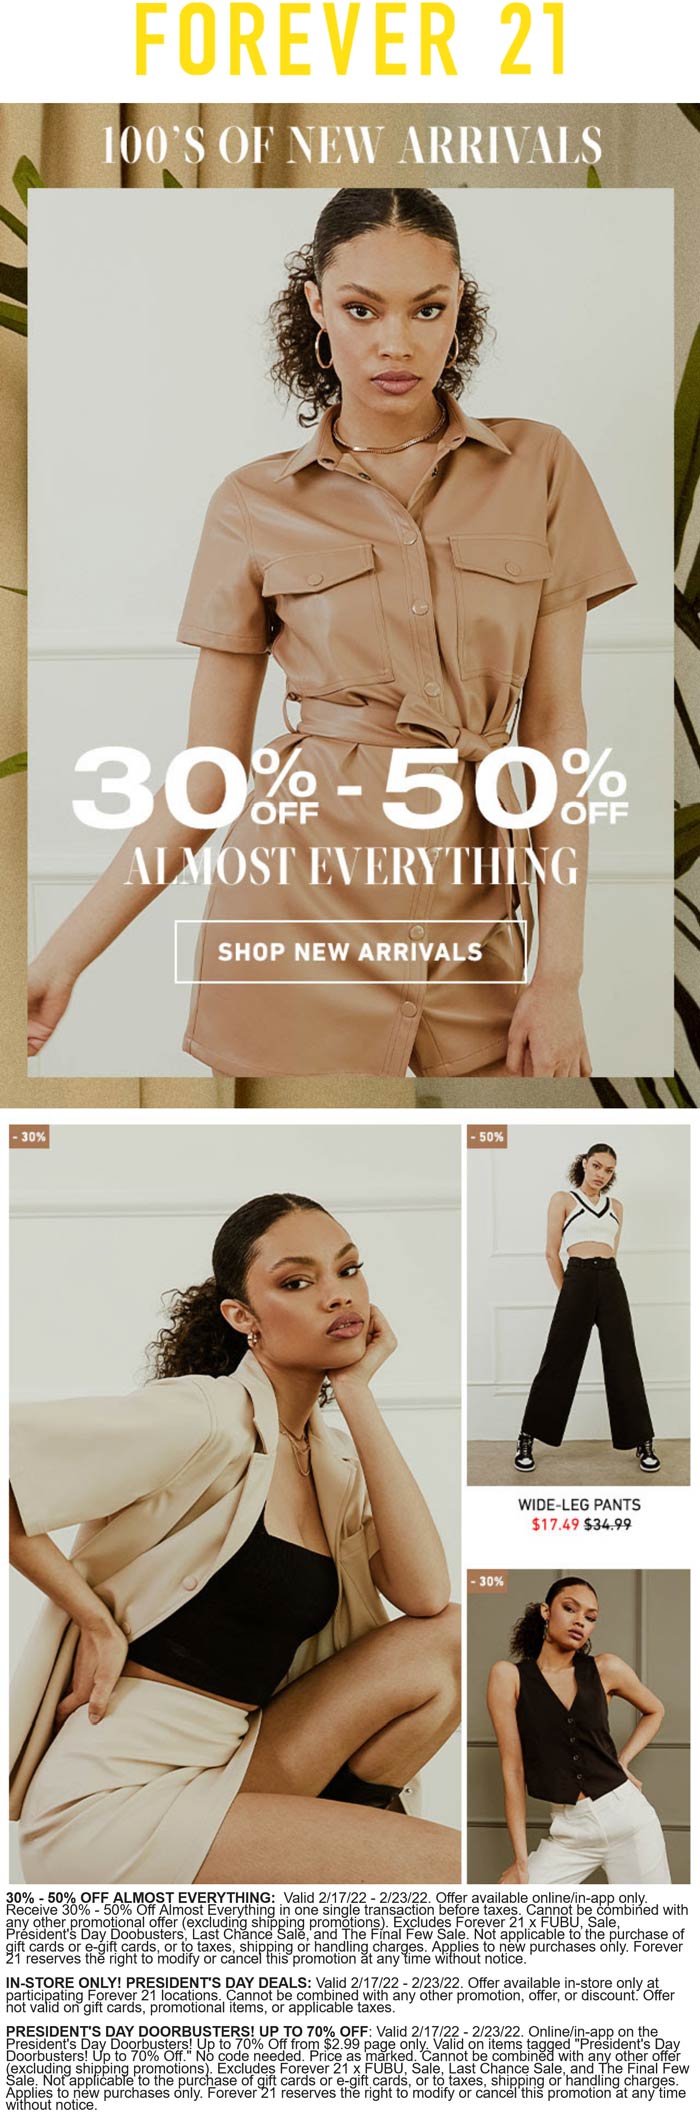 Forever 21 stores Coupon  30-50% off everything online at Forever 21 #forever21 